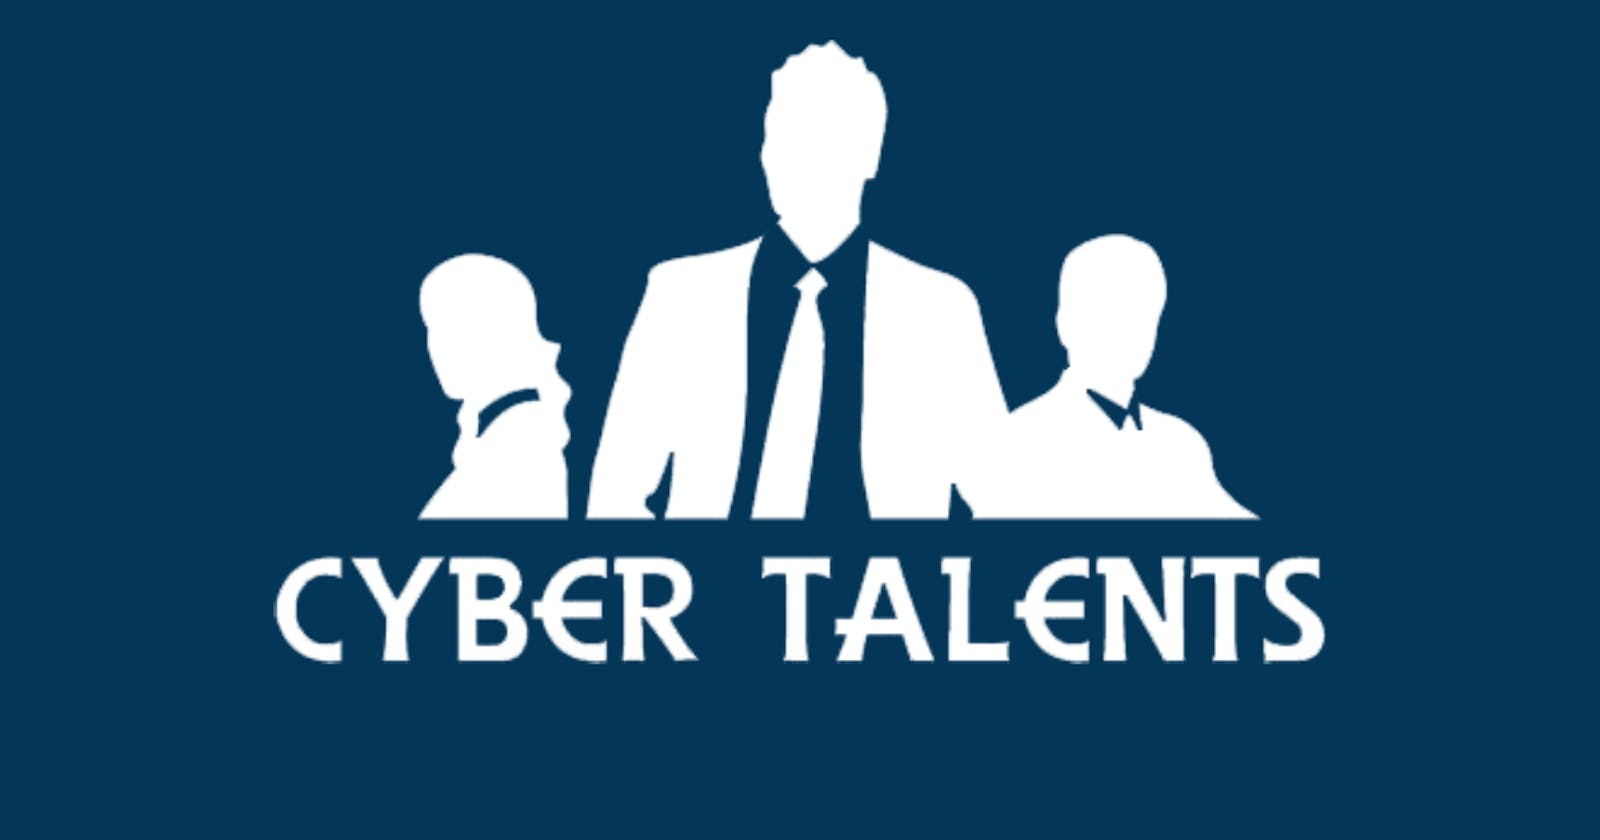 CyberTalents: Cryptography Category